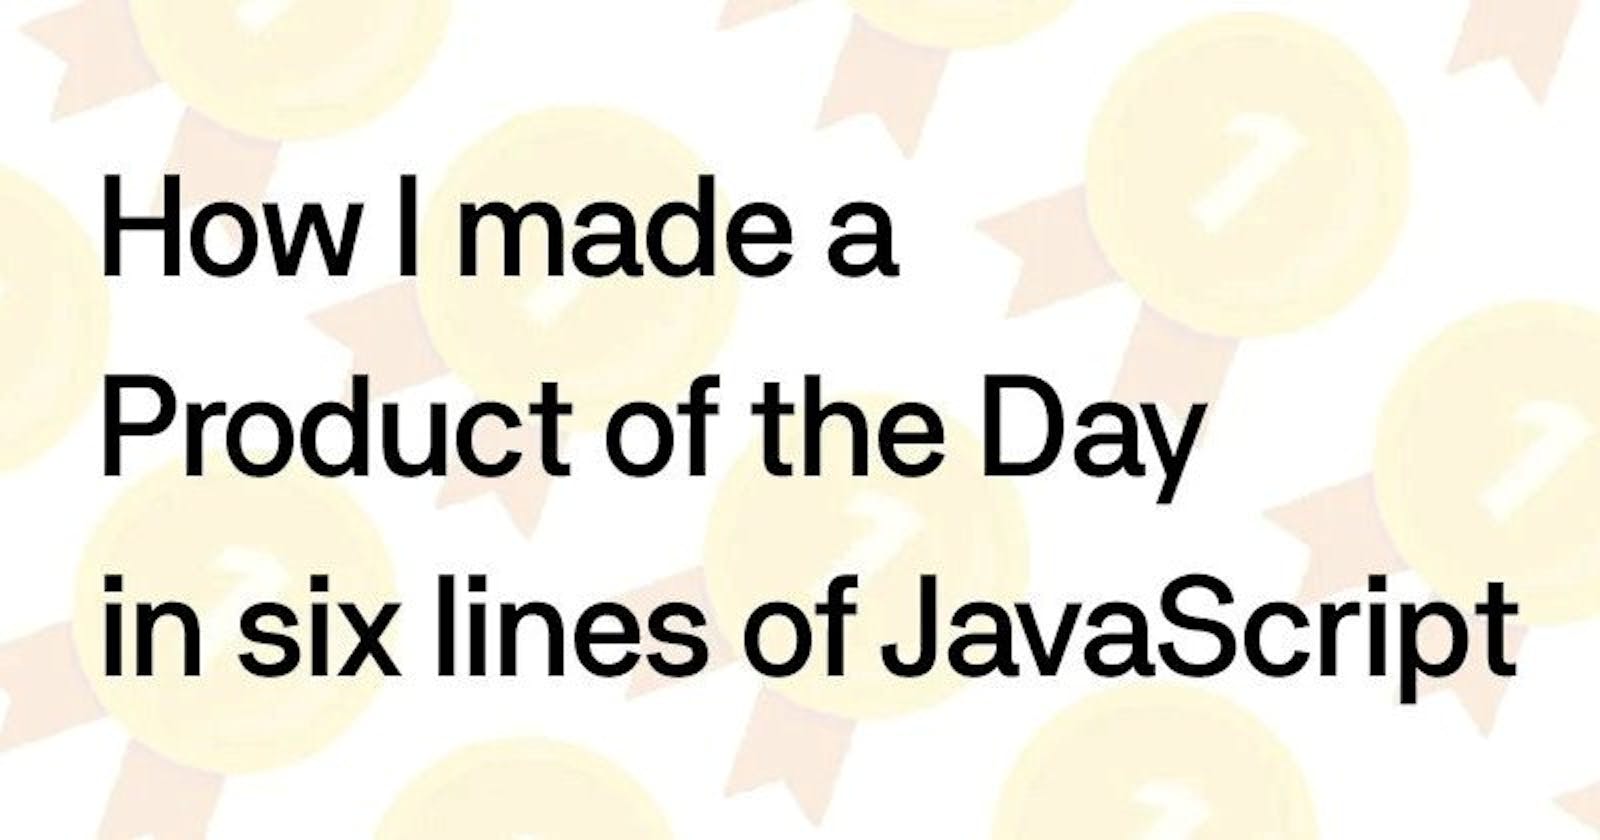 How I made a Product of the Day in six lines of JavaScript